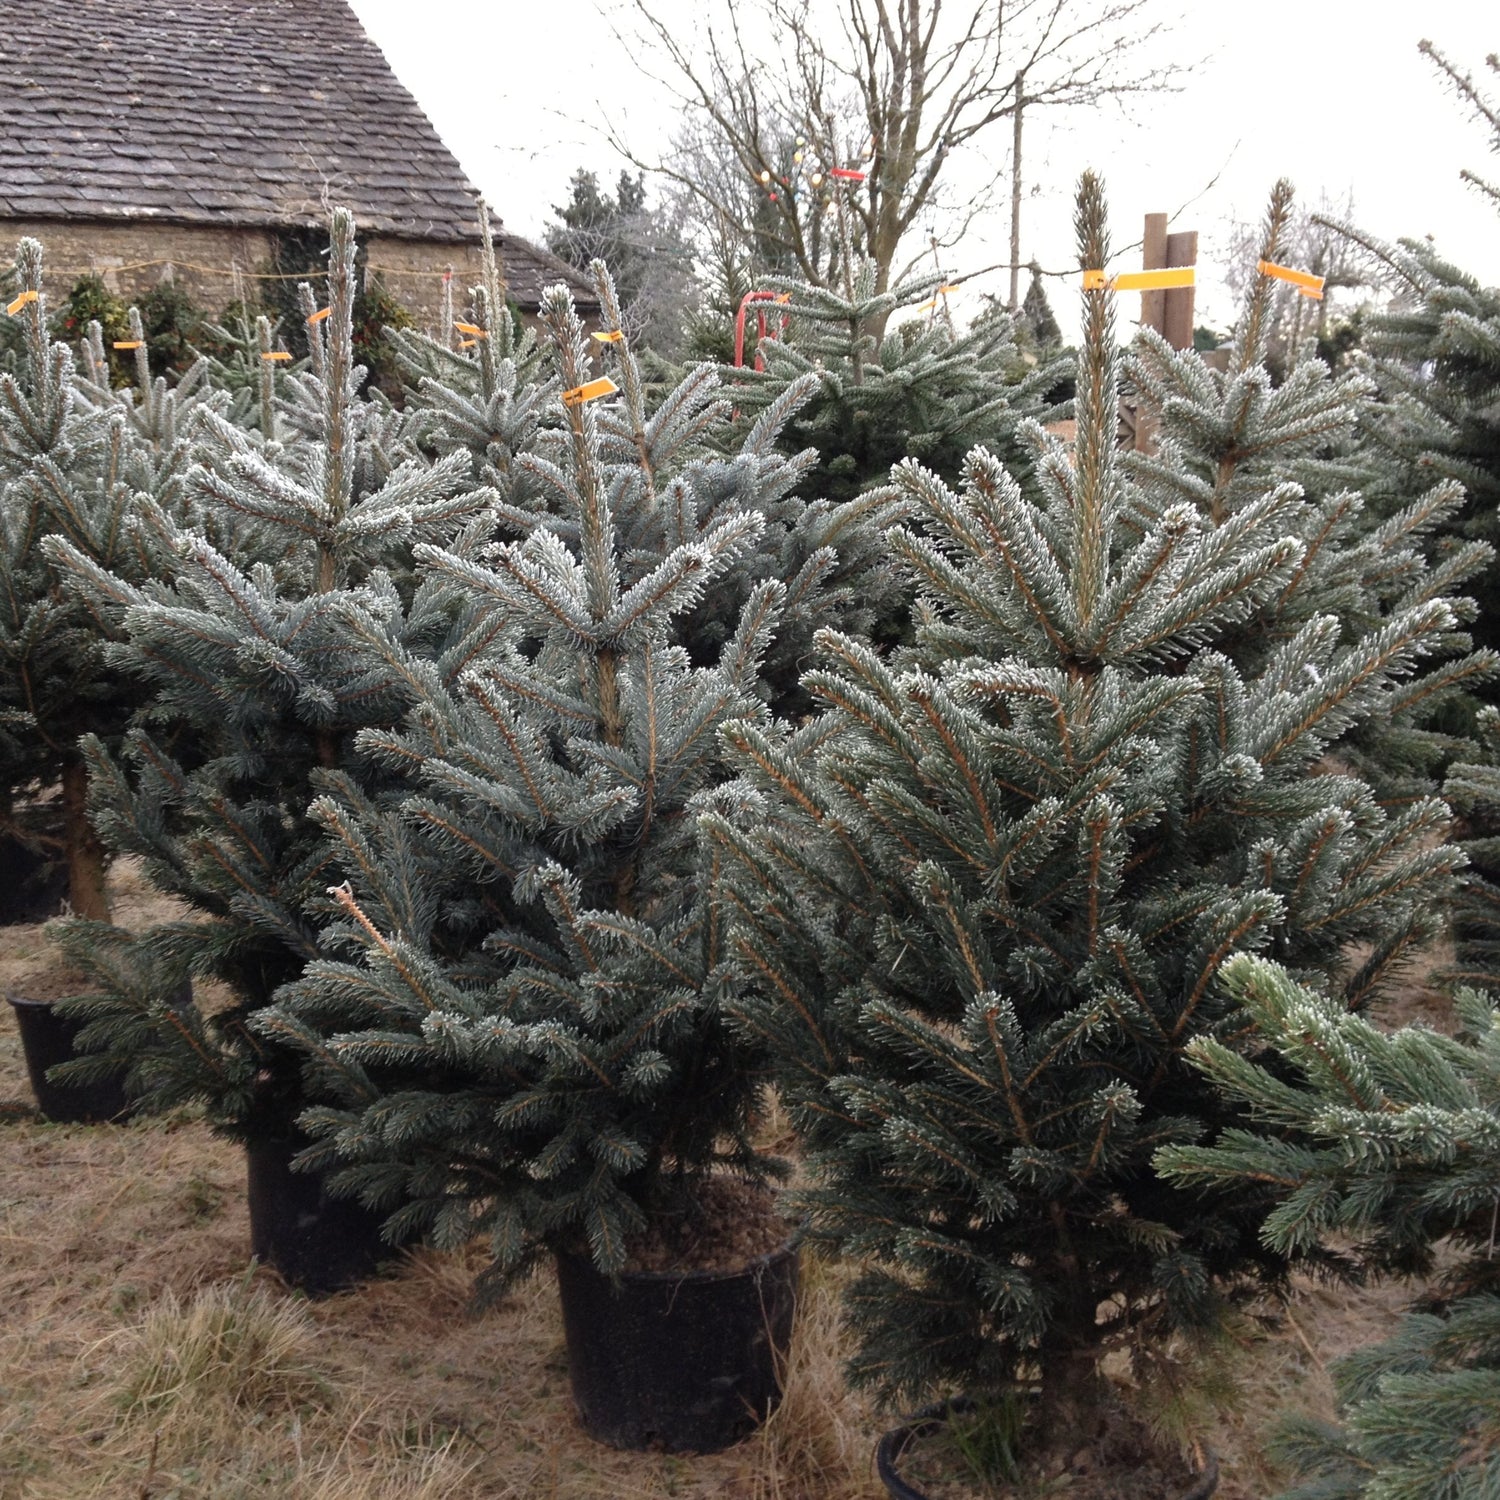 Blue Spruce Christmas Trees are bushy trees with a strong festive pine aroma. Trees are varying shades of icy white-green to blue.